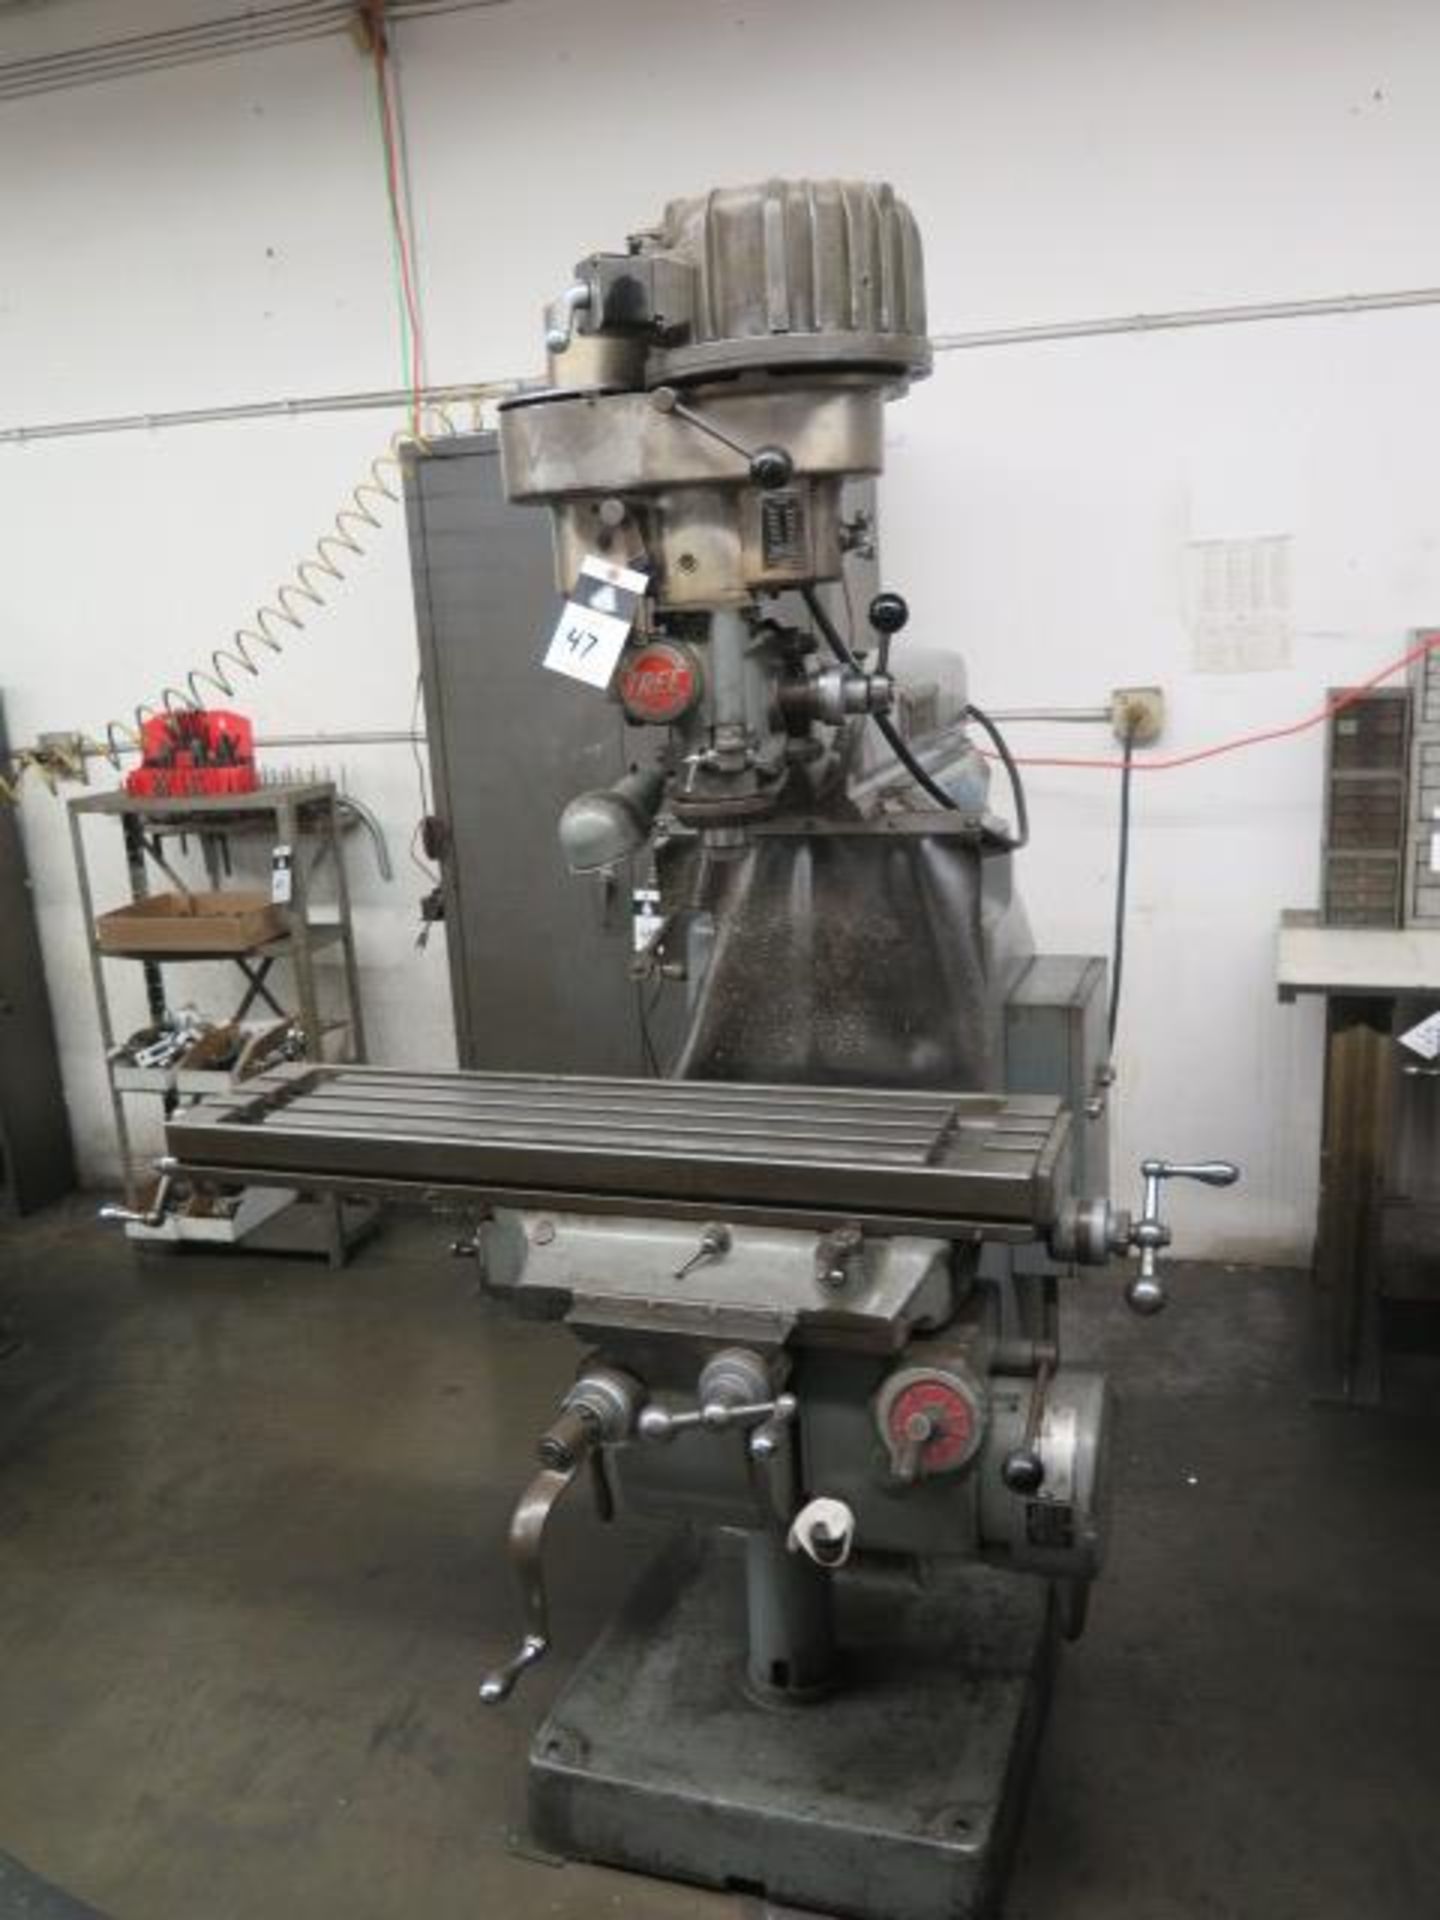 Tree 2UVR Vert Mill w/ 1.5Hp Motor, 60-3300 Dial Change RPM, Colleted Spindle, PF, SOLD AS IS